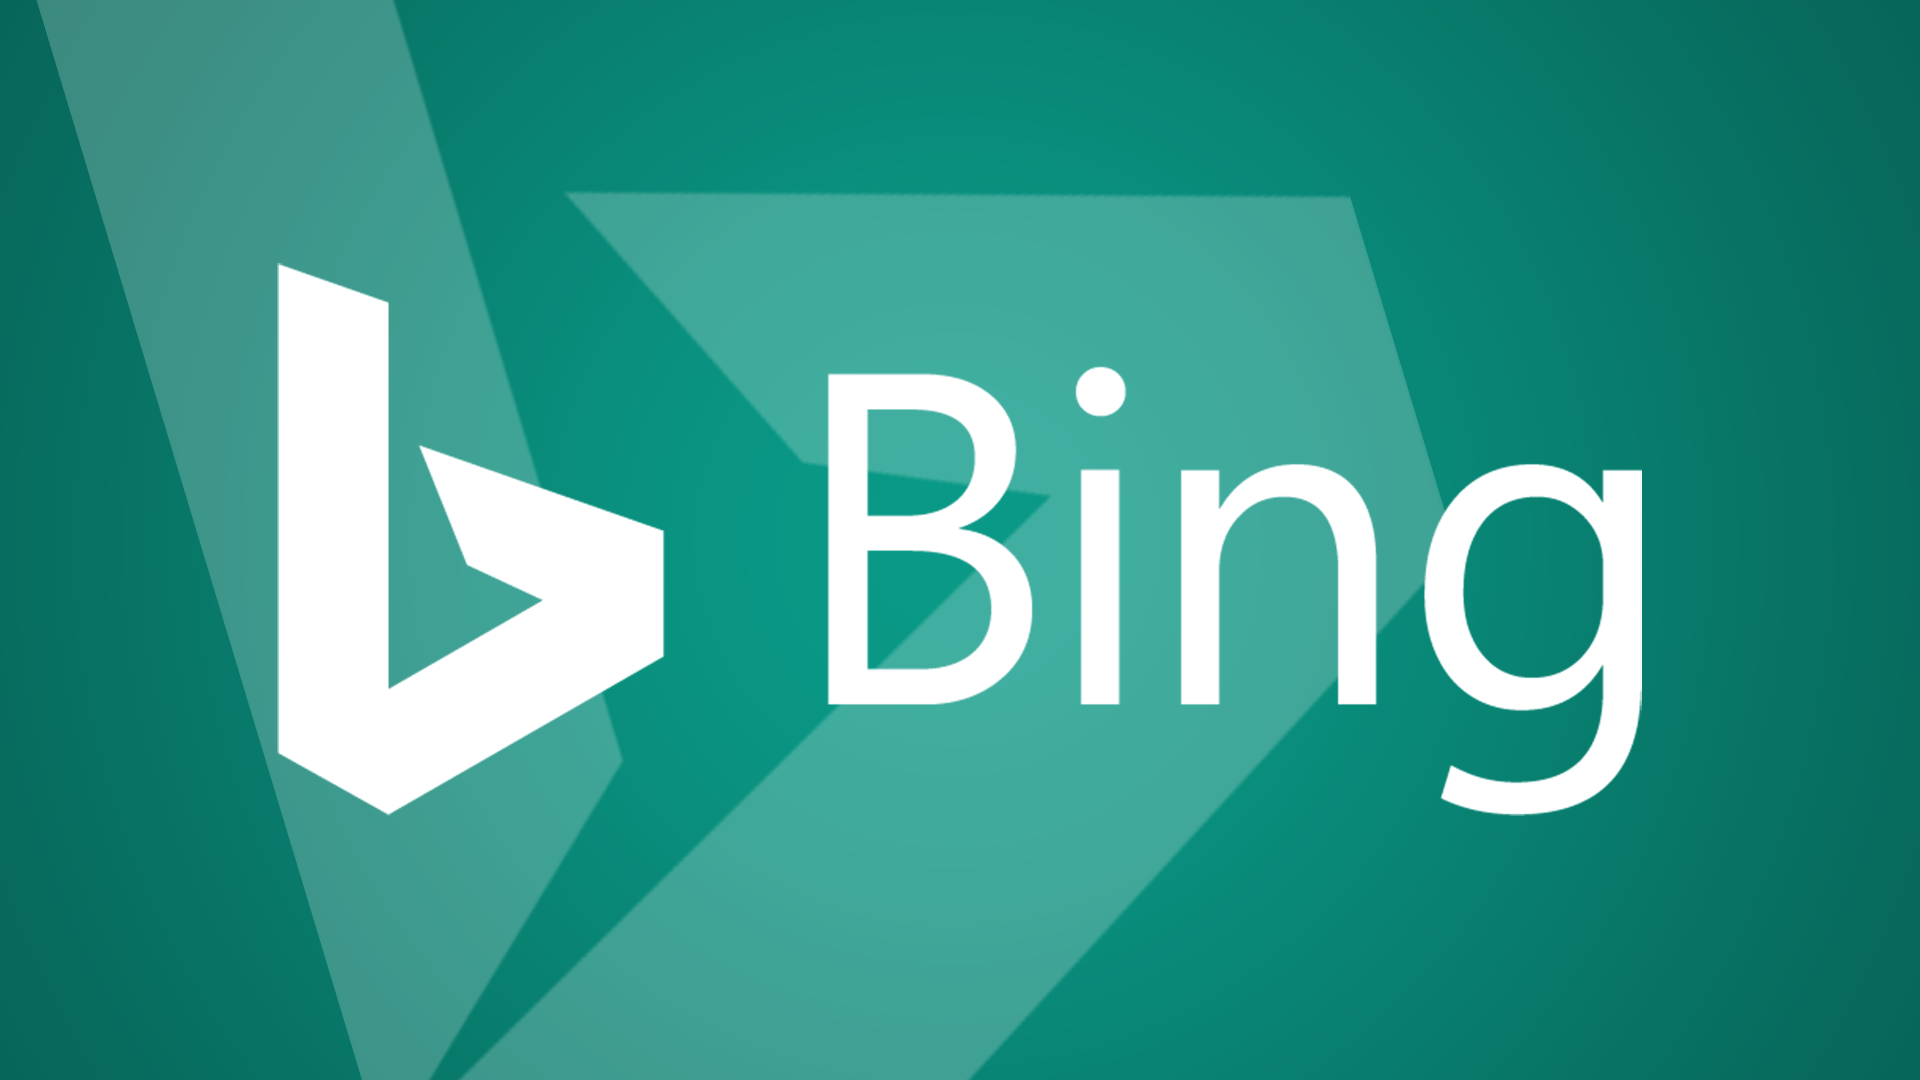 Bing Teal Logo - The next Bing thing: Get your Bing campaigns in top shape for 2017 ...